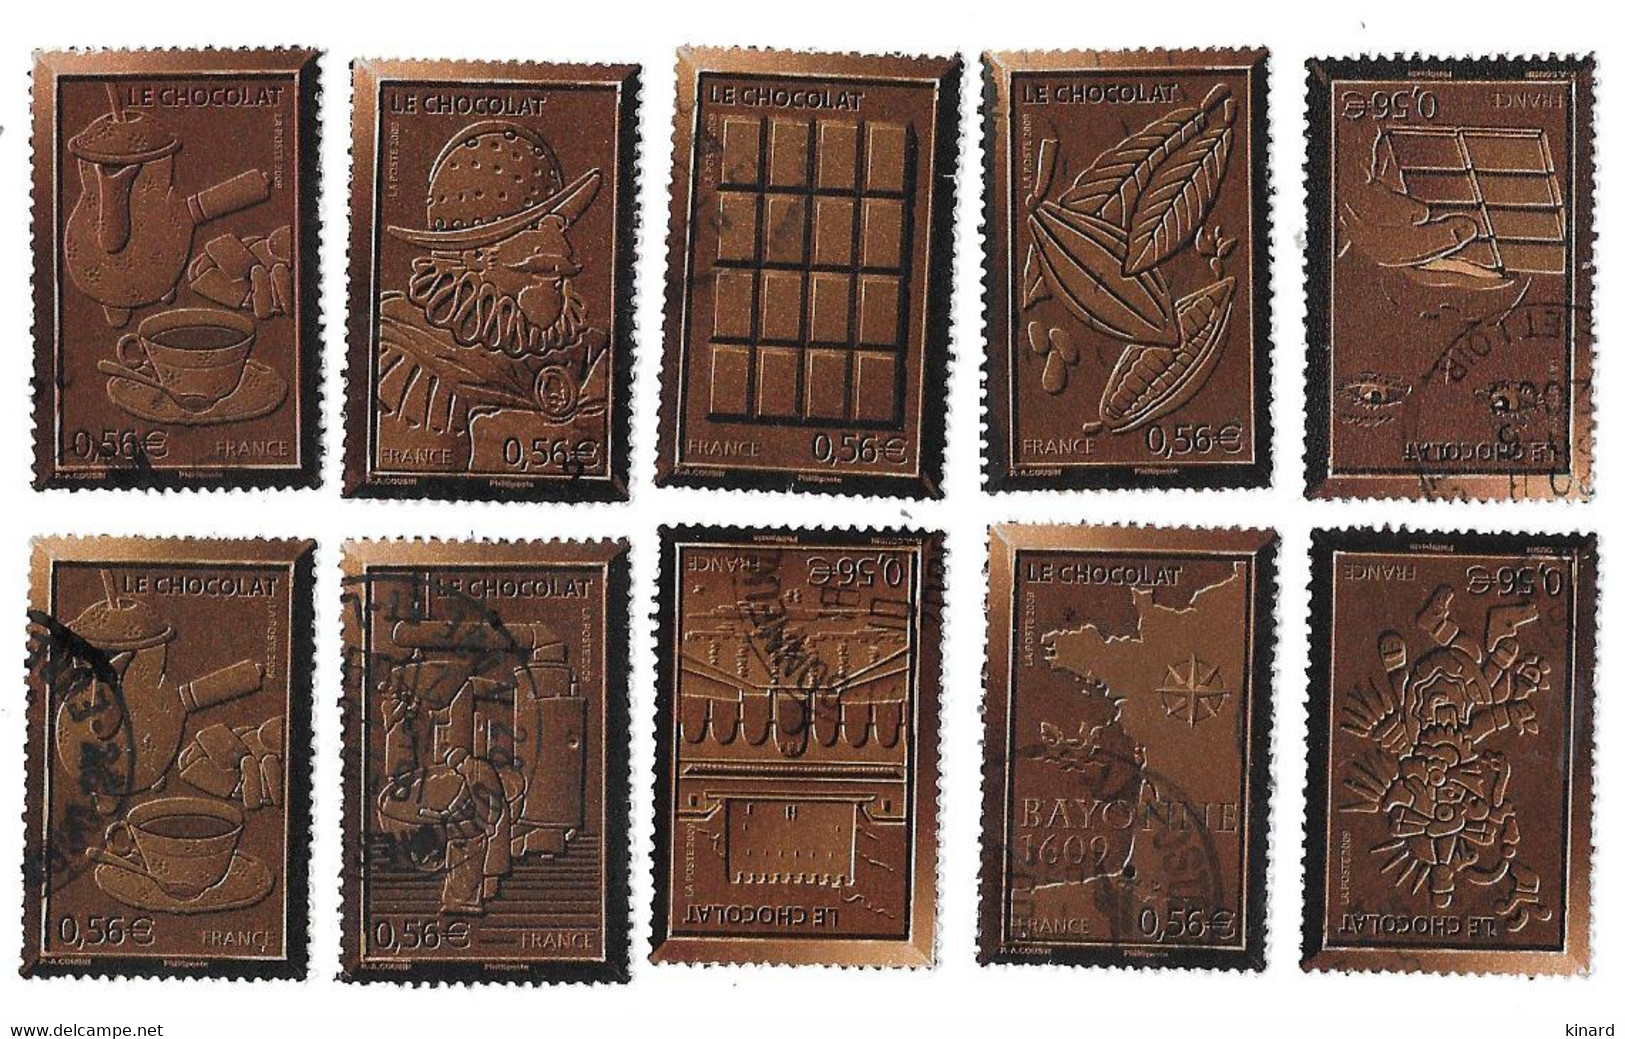 TIMBRES  FRANCE. OBLITERATION   RONDE.... SERIE LE CHOCOLAT..N°4357/4366..TBE SCAN - Gebraucht